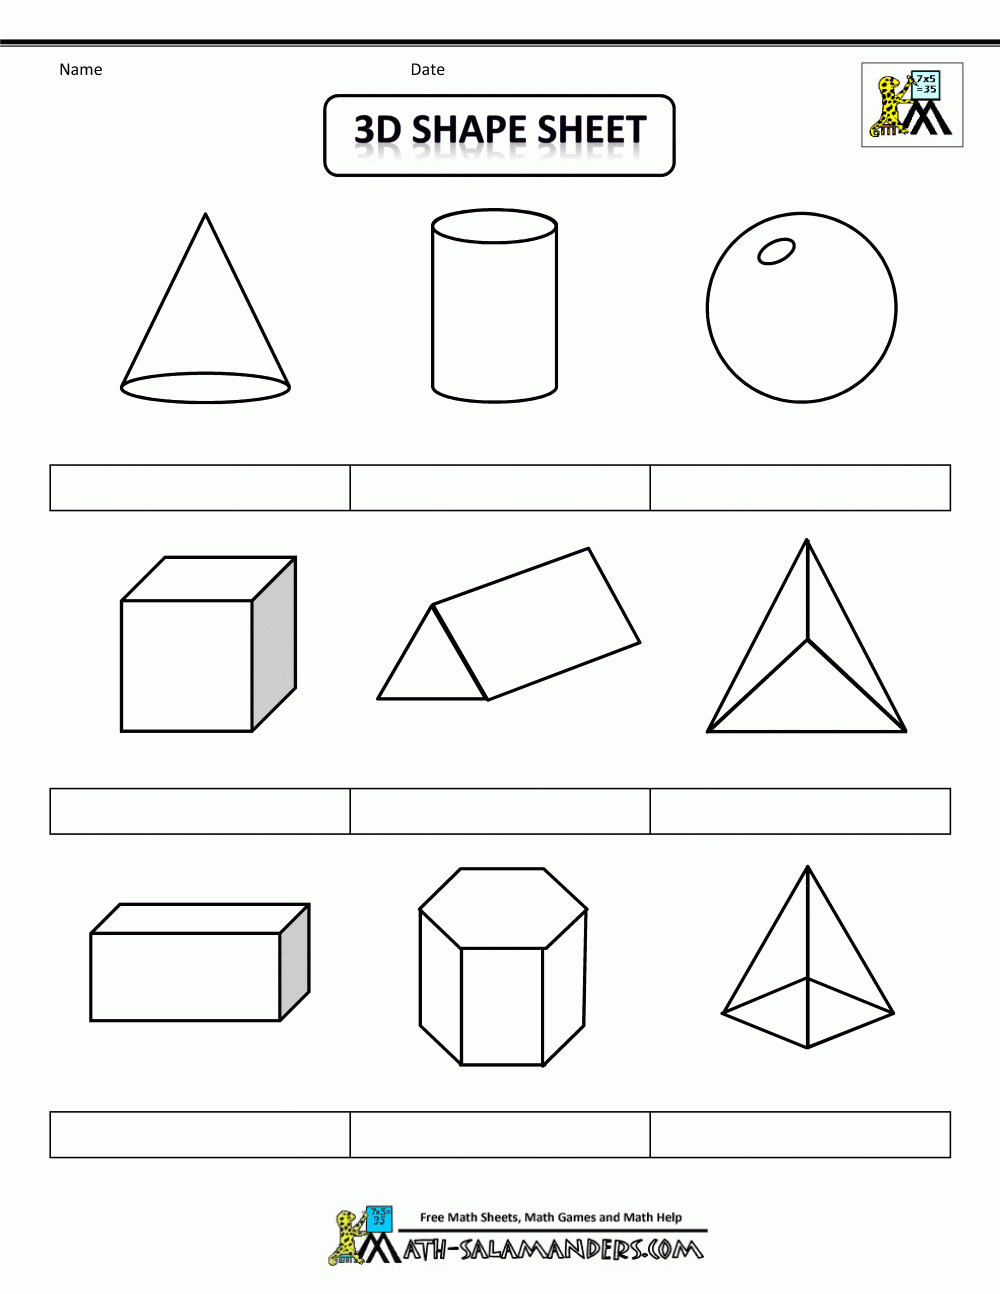 Printable Shapes 2D And 3D - Free Printable Geometric Shapes